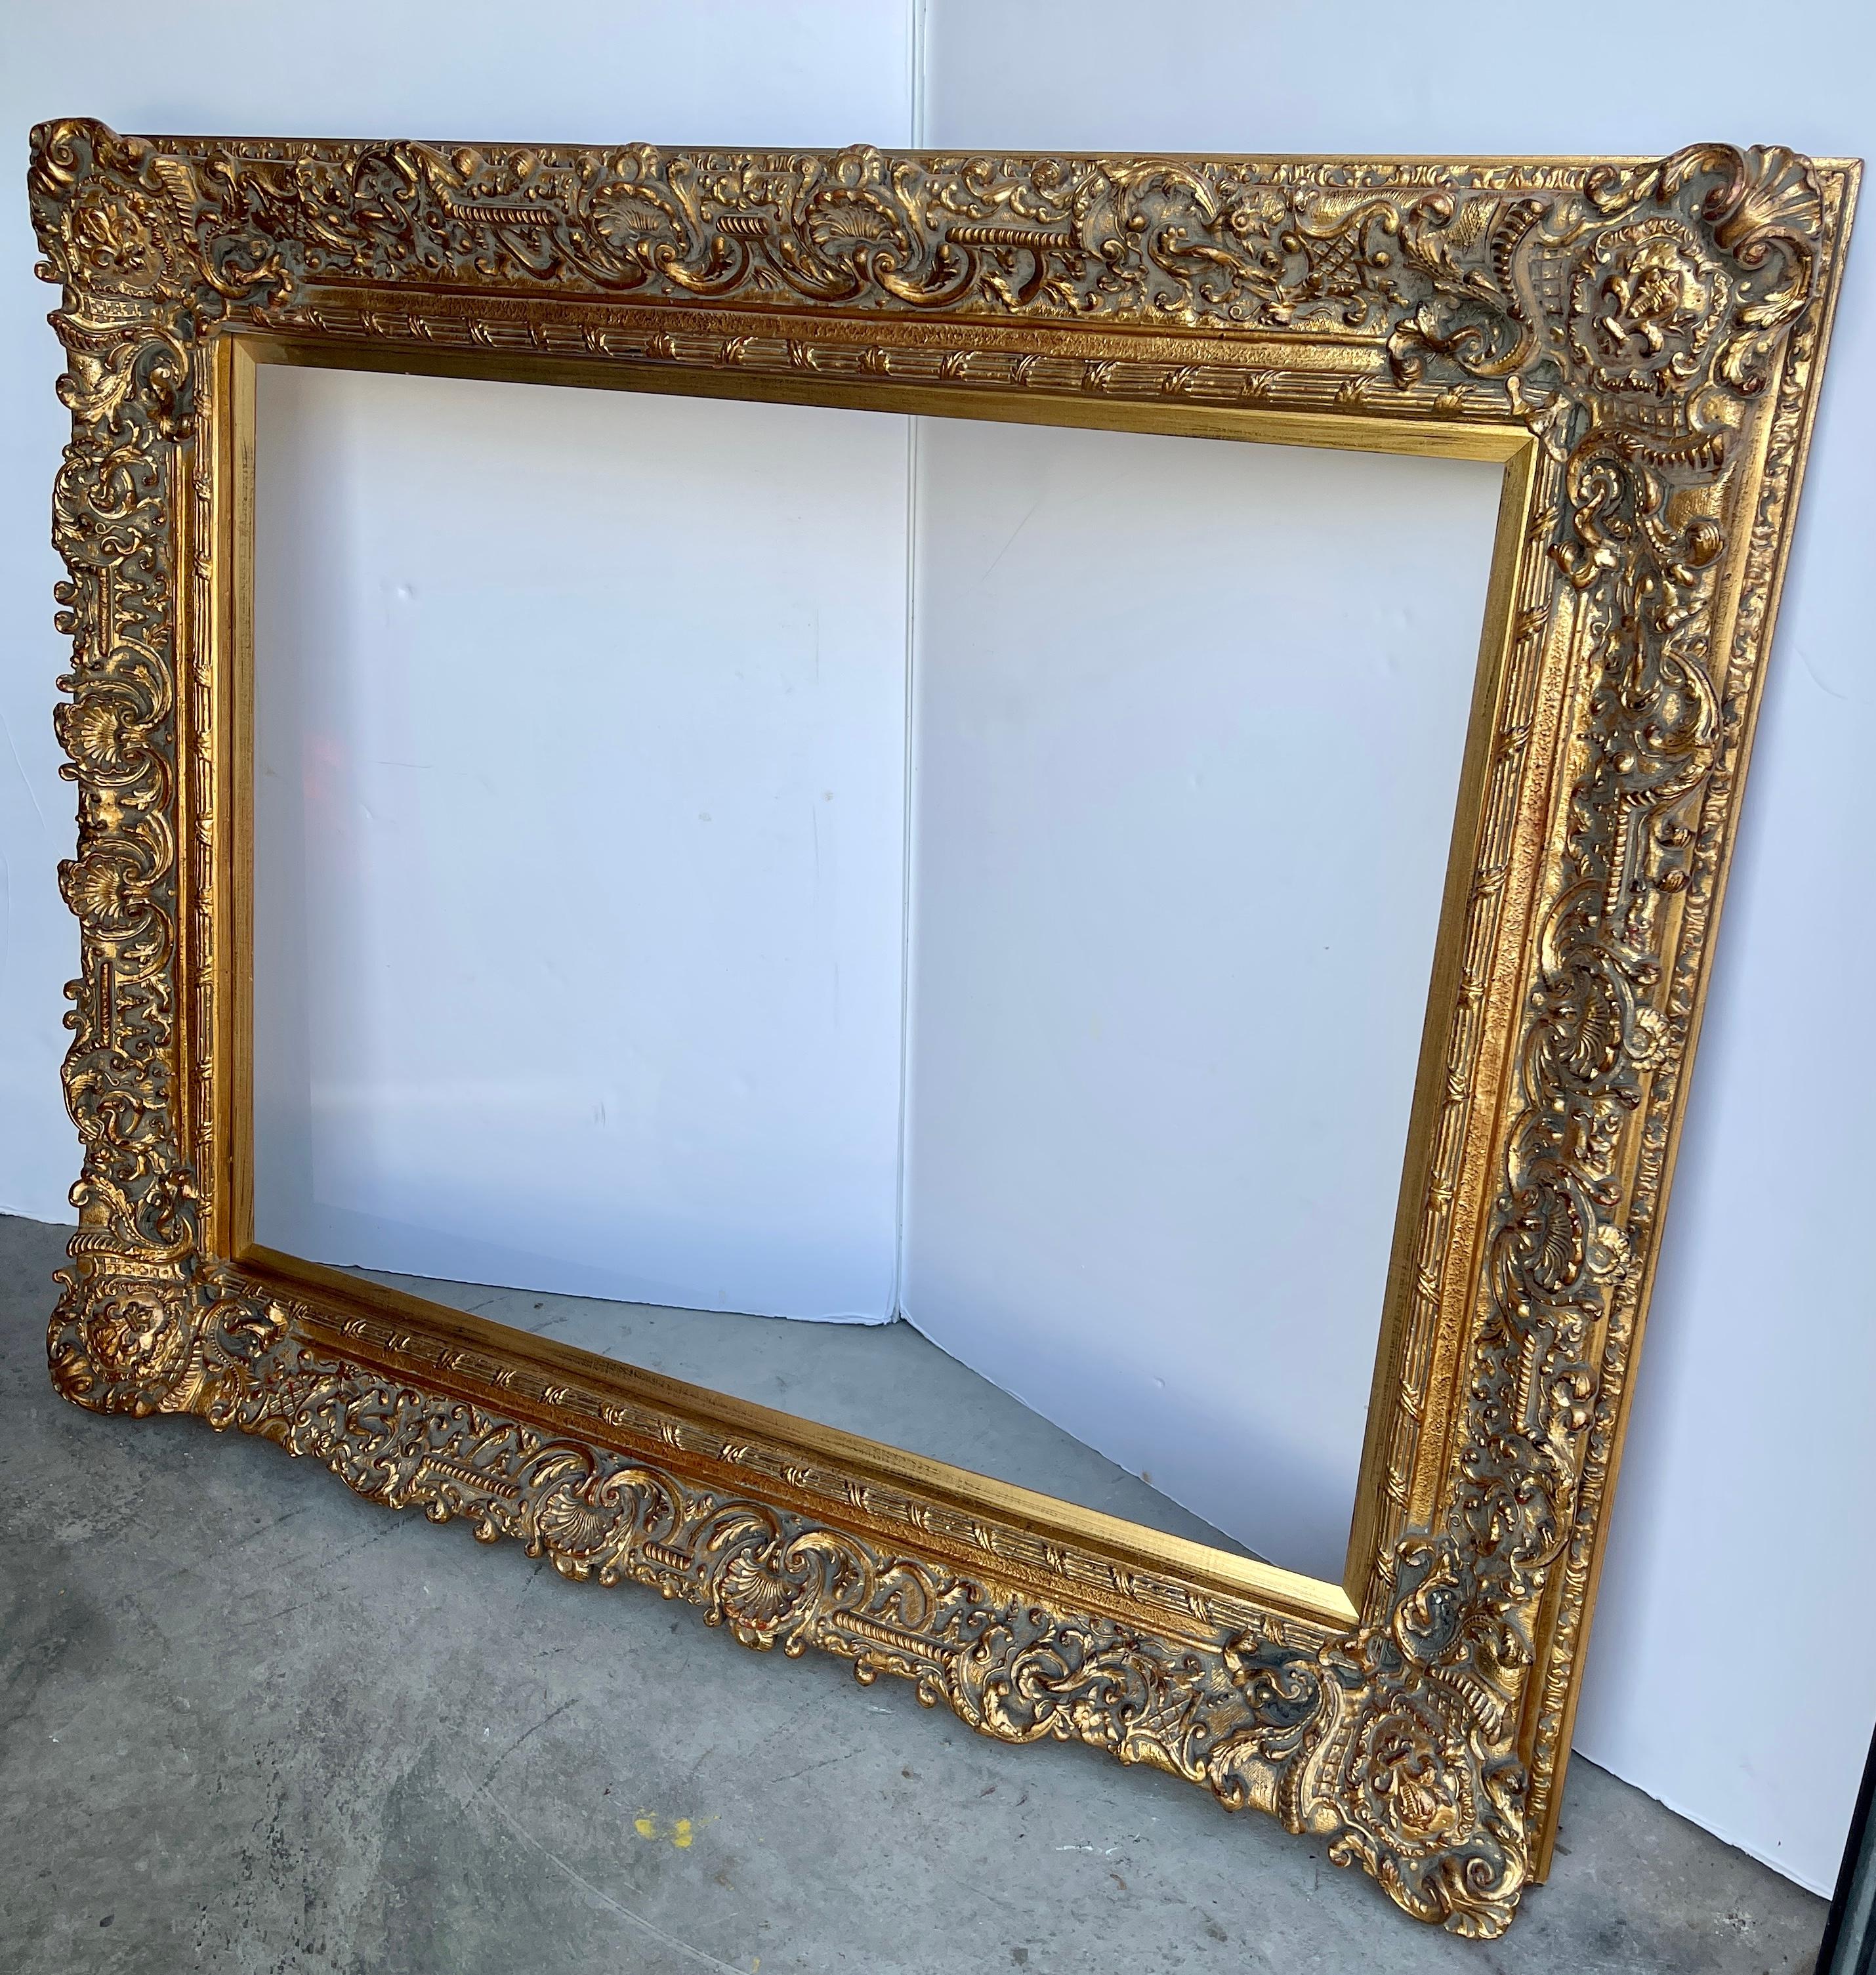 20th Century Large Ornate Carved Gilt Wood Frame, French Rococo Style  In Good Condition For Sale In Haddonfield, NJ